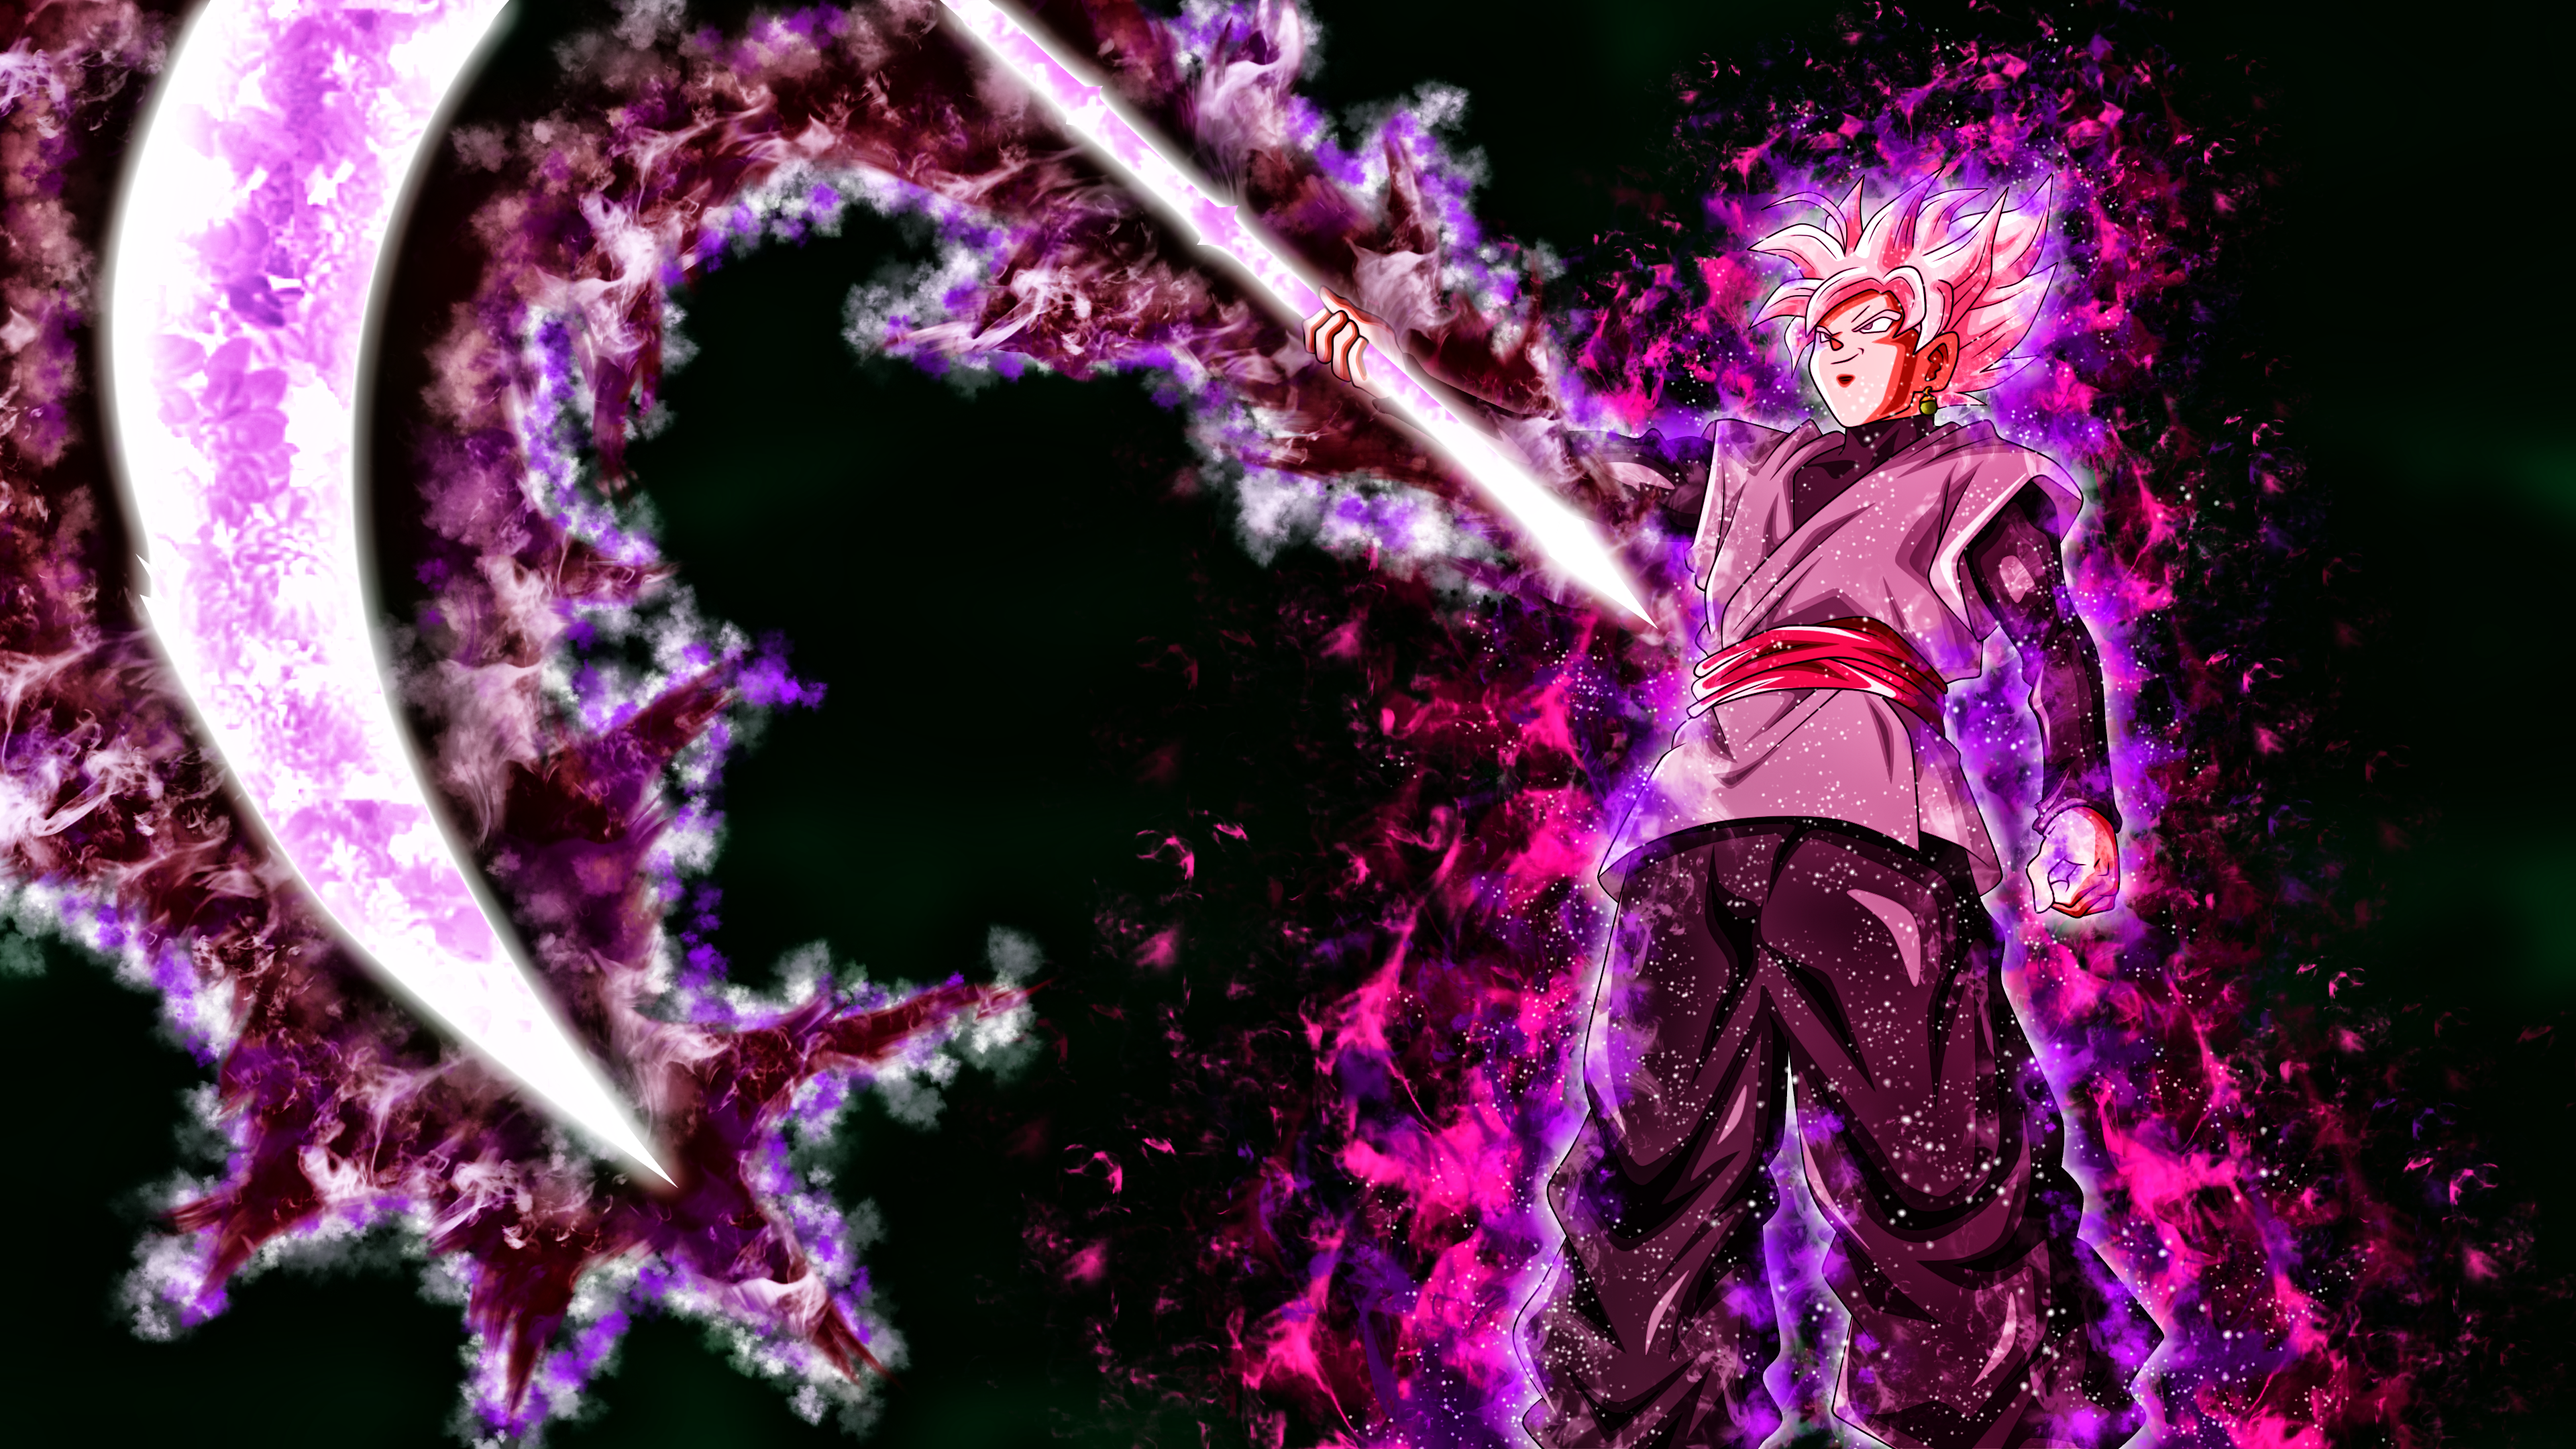 Goku Black Rose Wallpapers posted by Ethan Peltier.